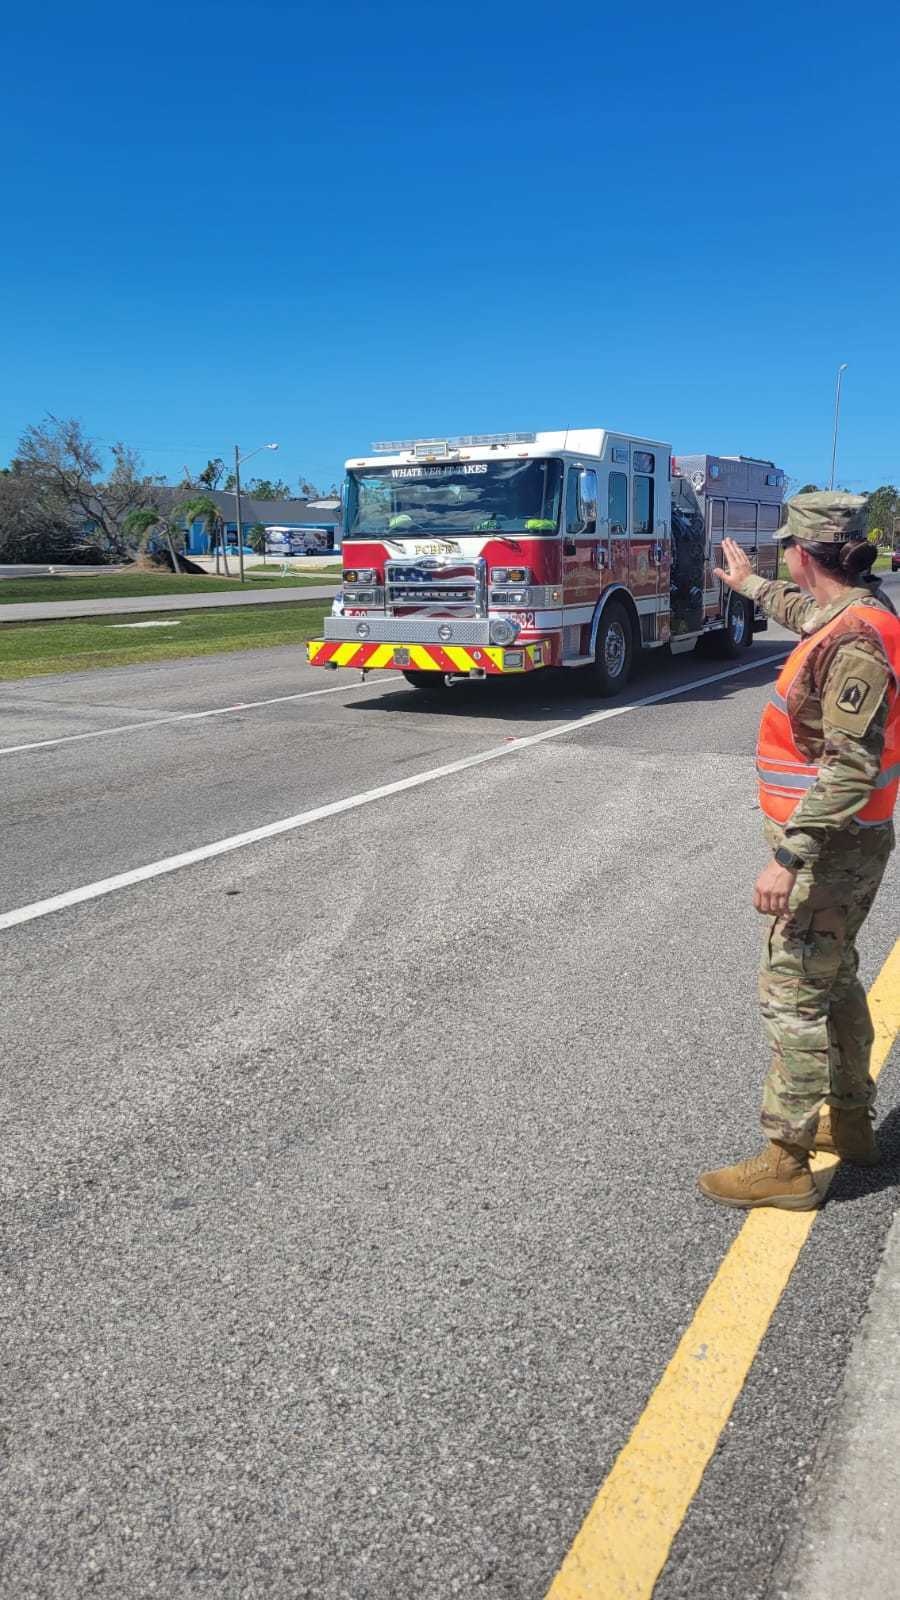 FL National Guard continues to assist the citizens of Florida